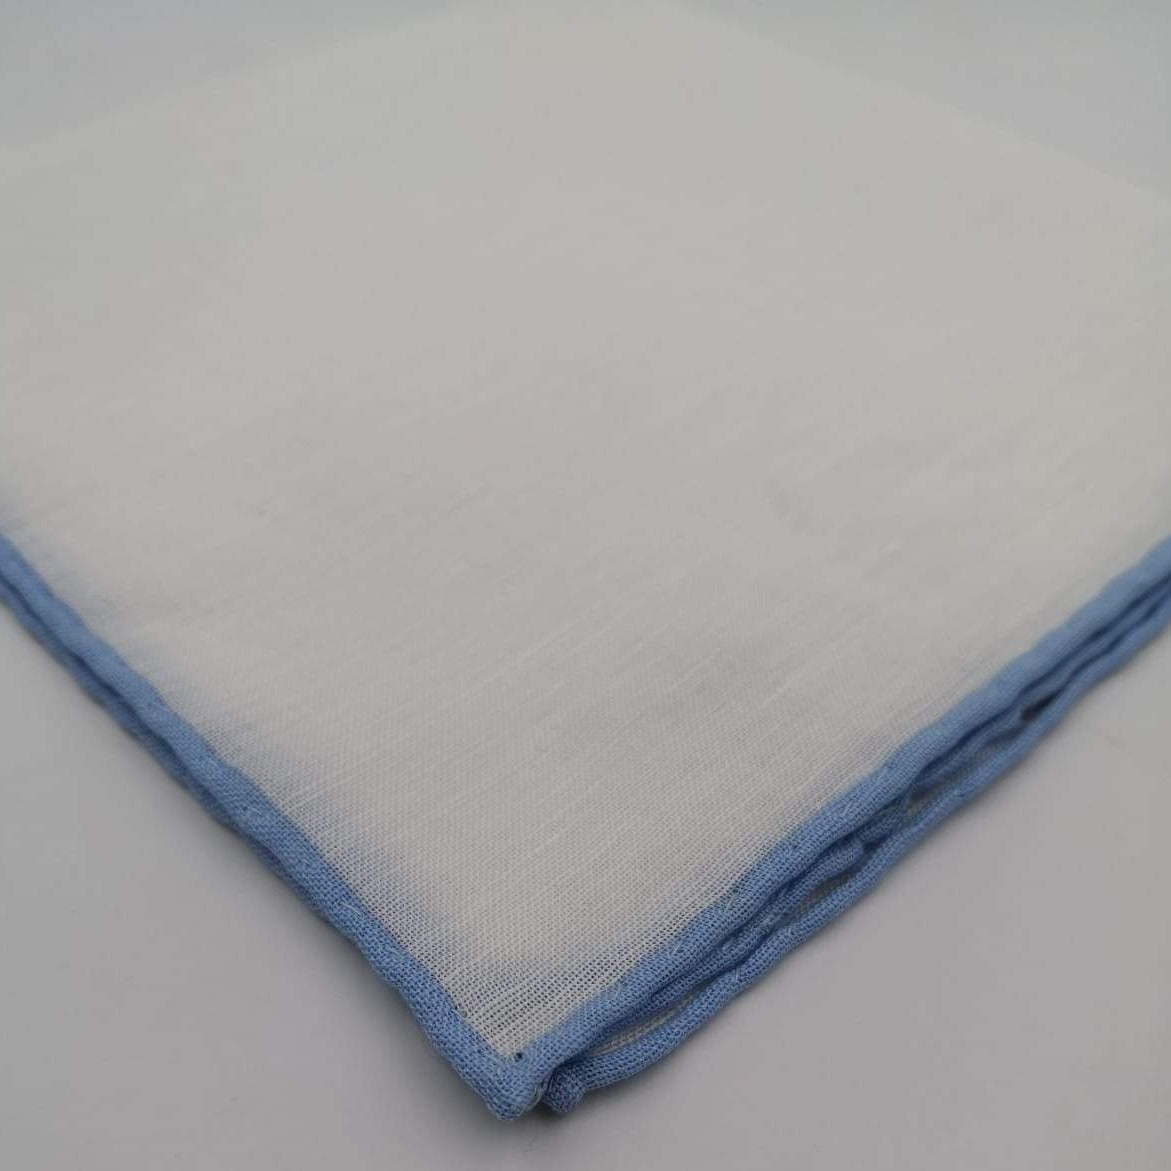 Cruciani & Bella 60%Linen and 40% Cotton Hand-rolled  -  Pocket Square White and Light Blue Handmade in Italy 39 cm X 39cm #4561